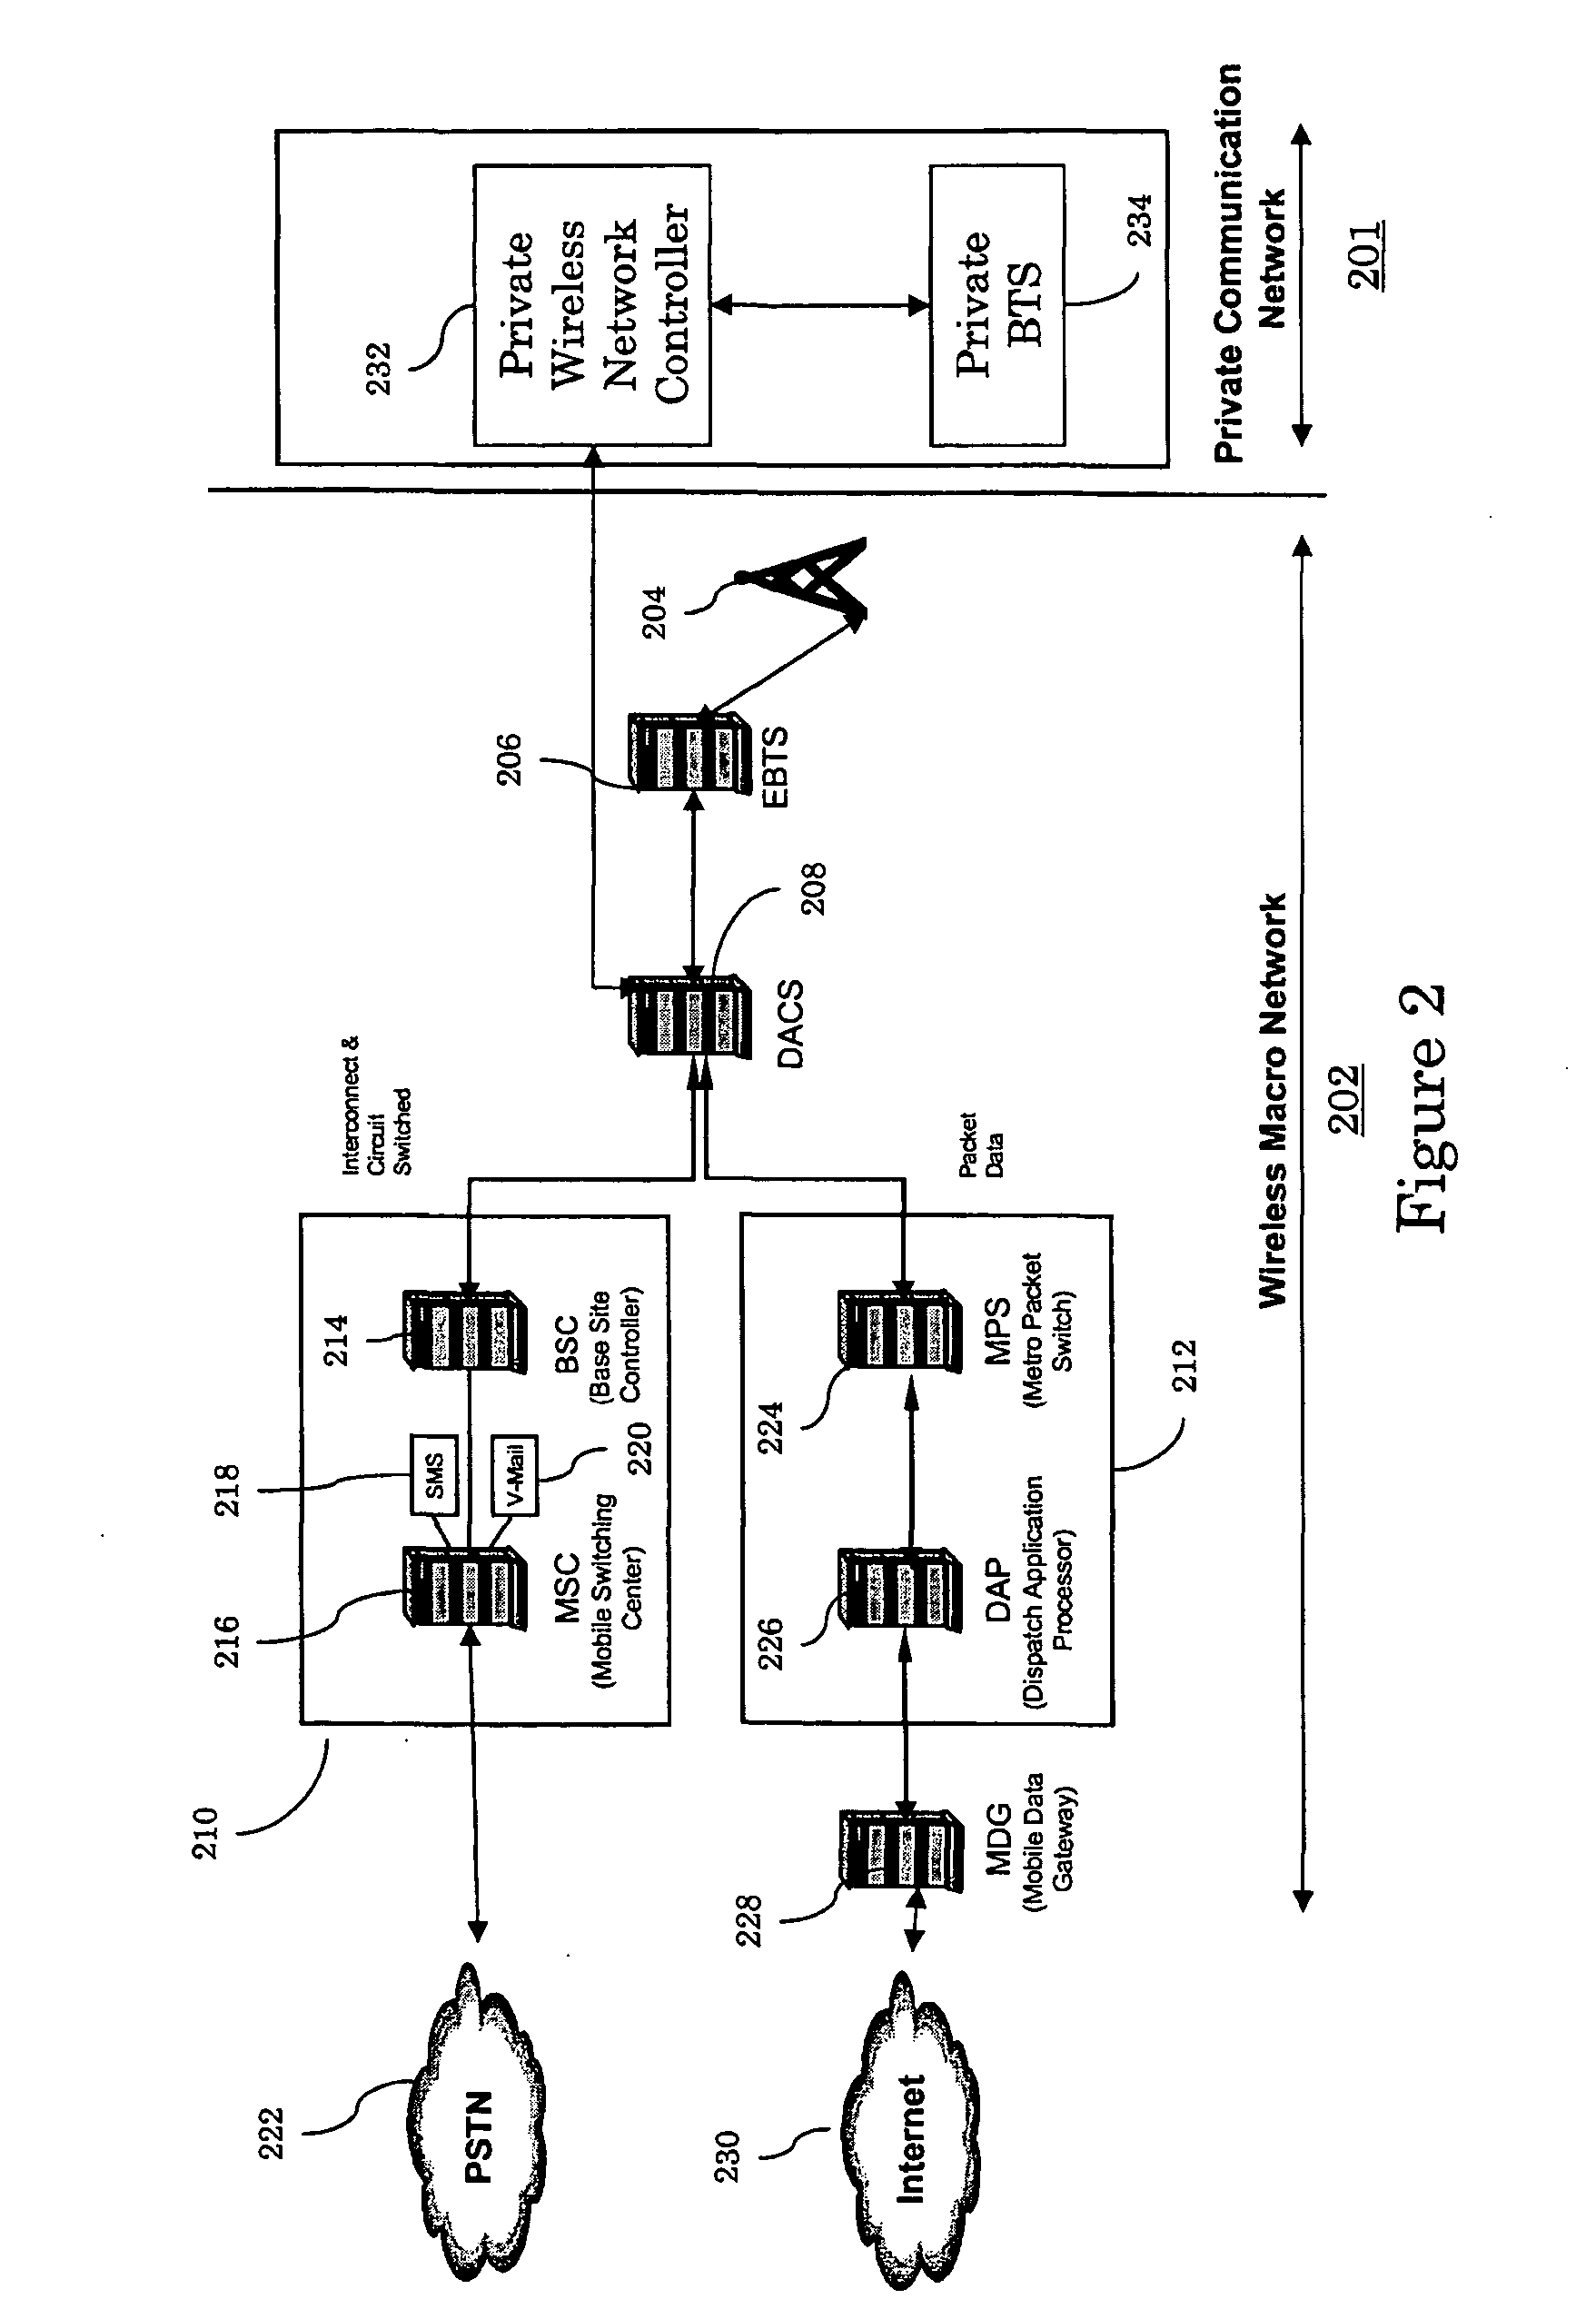 System and method for private wireless networks